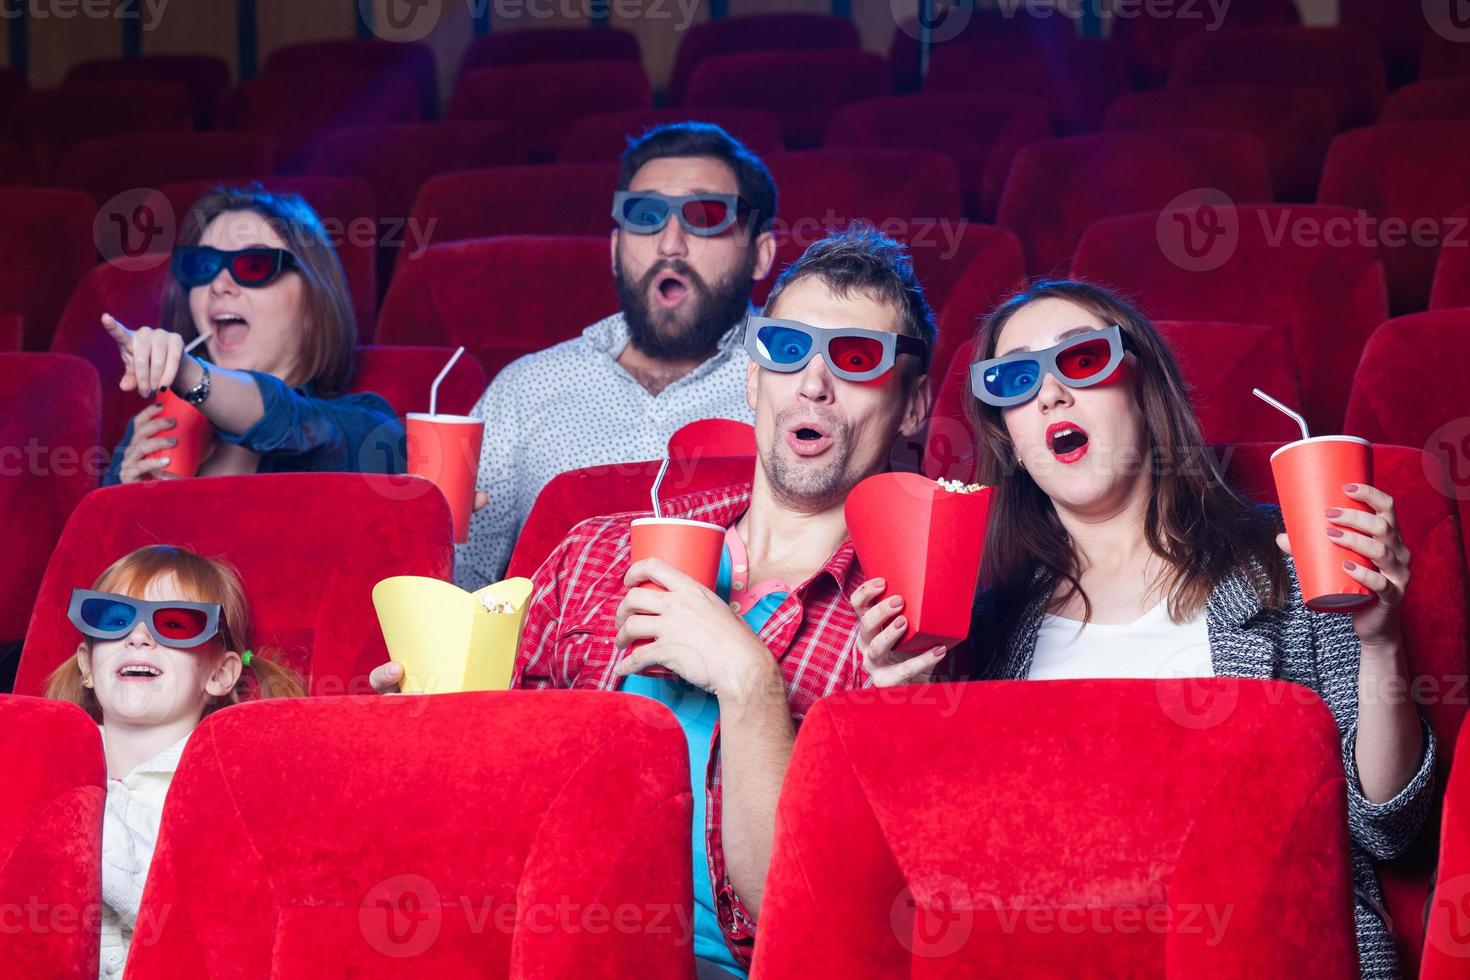 The people's emotions in the cinema photo